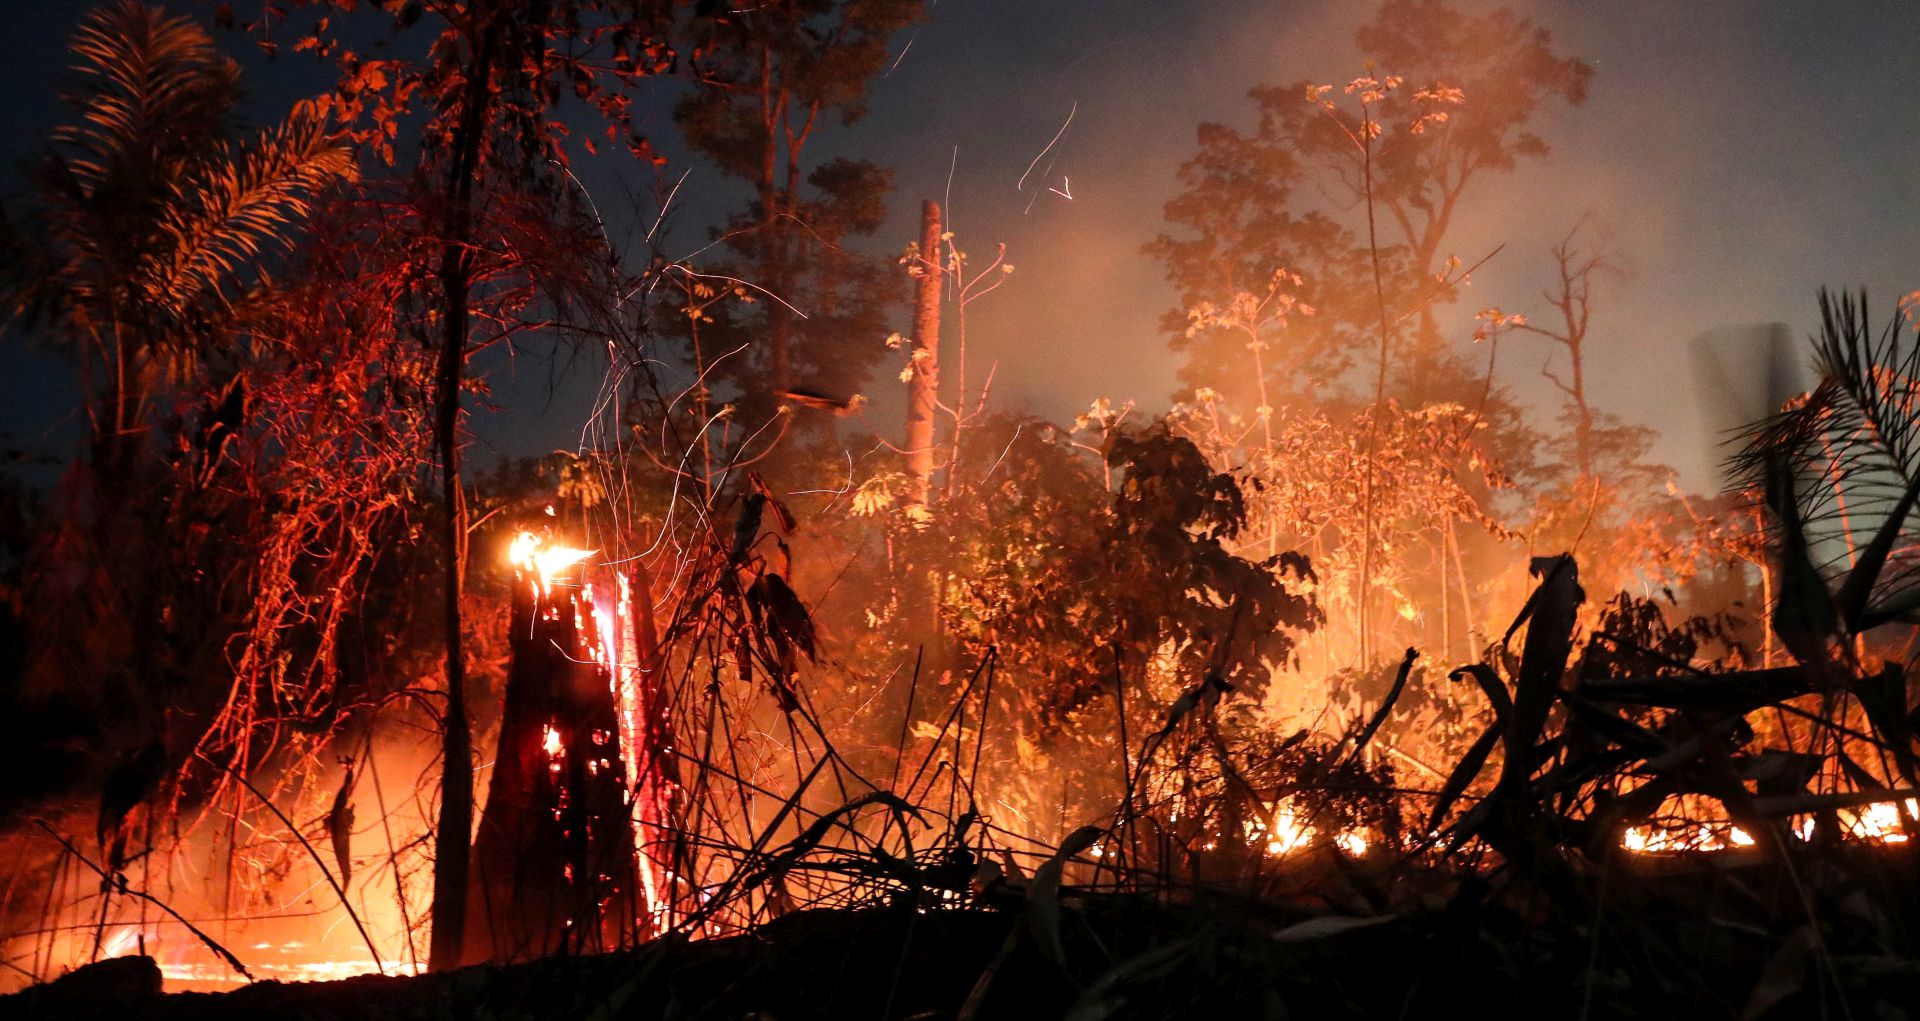 epa07831600 A fire burns in a in Porto Velho, Brazil, 09 September 2019. According to the National Space Research Institute (INPE) of Brazil, the Brazilian Amazon lost 1,698 square kilometers of its vegetation cover in the month of August, an area 222 percent higher than deforested land in the same month of 2018, 526 square kilometers.  EPA/FERNANDO BIZERRA JR